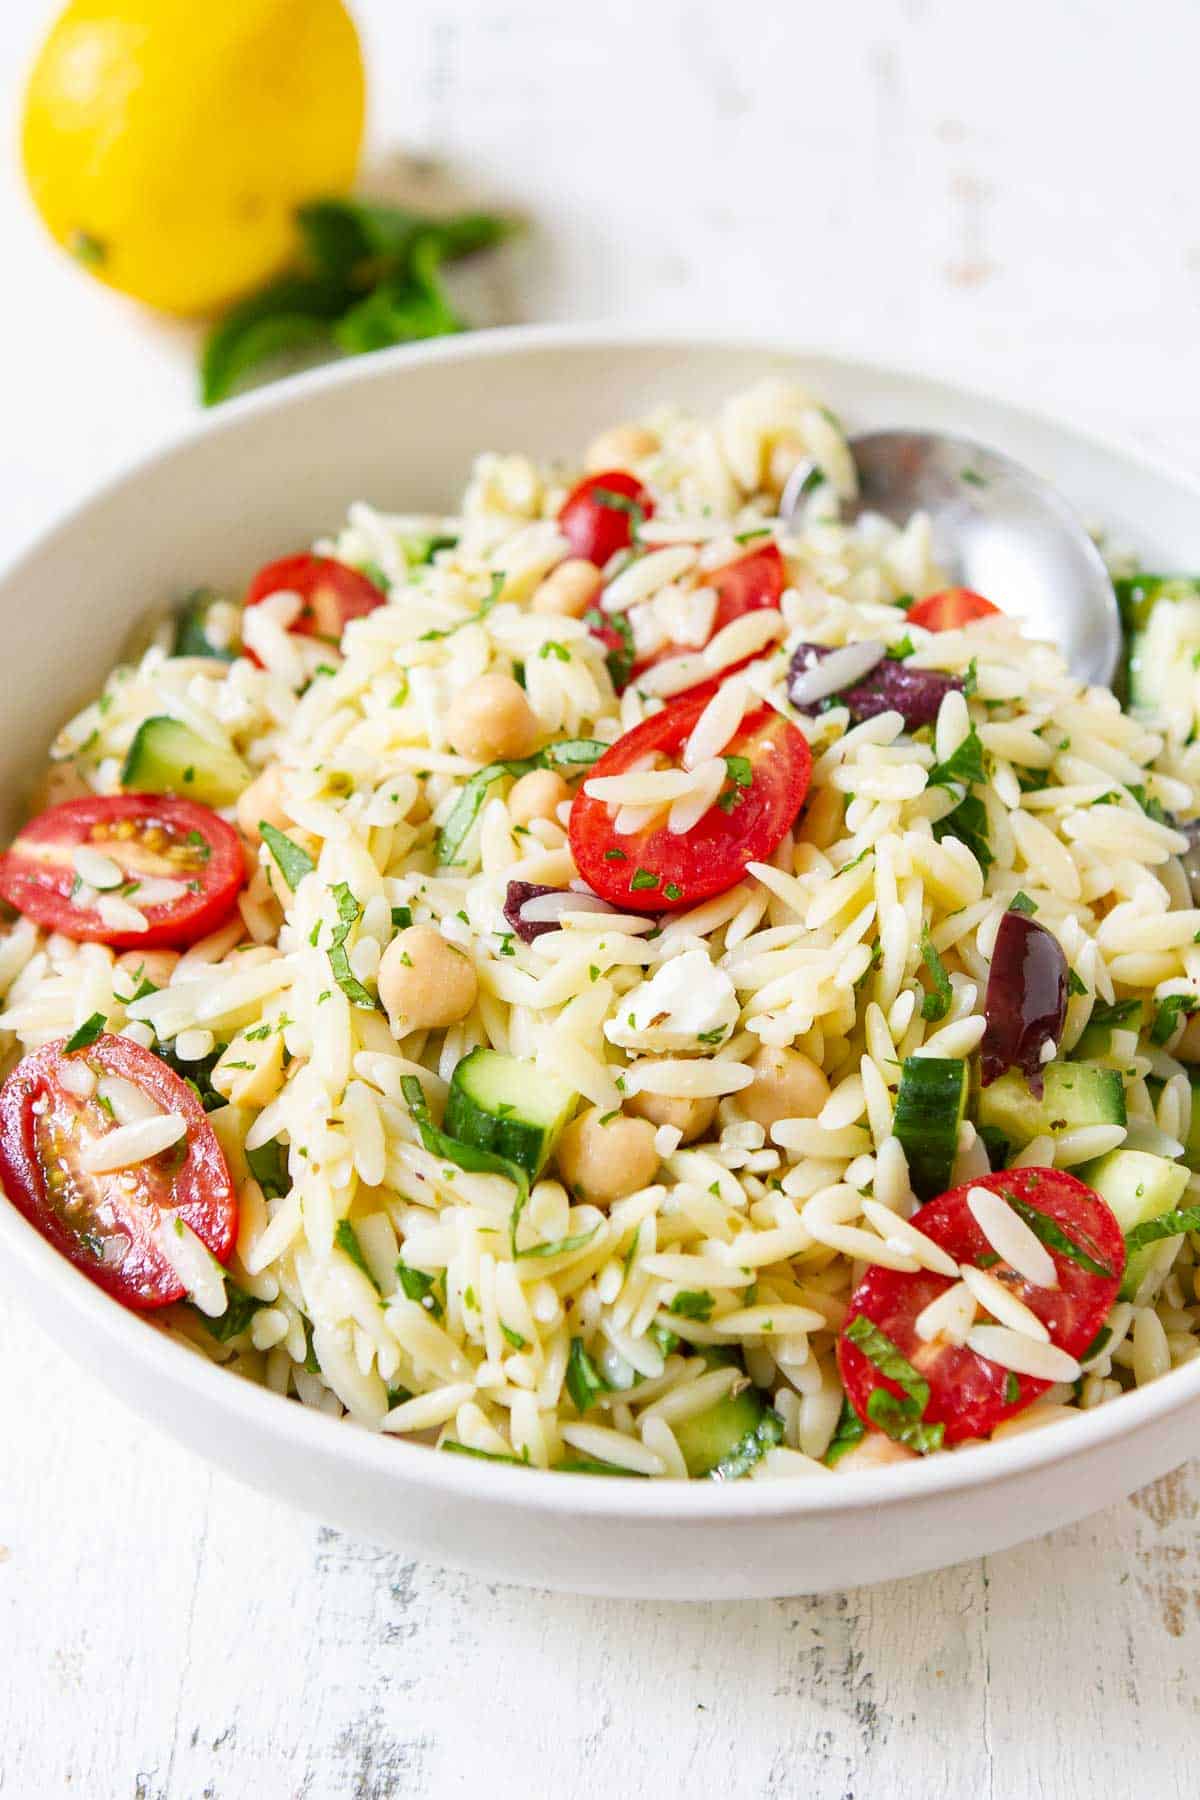 Orzo pasta salad with vegetables in a white bowl.